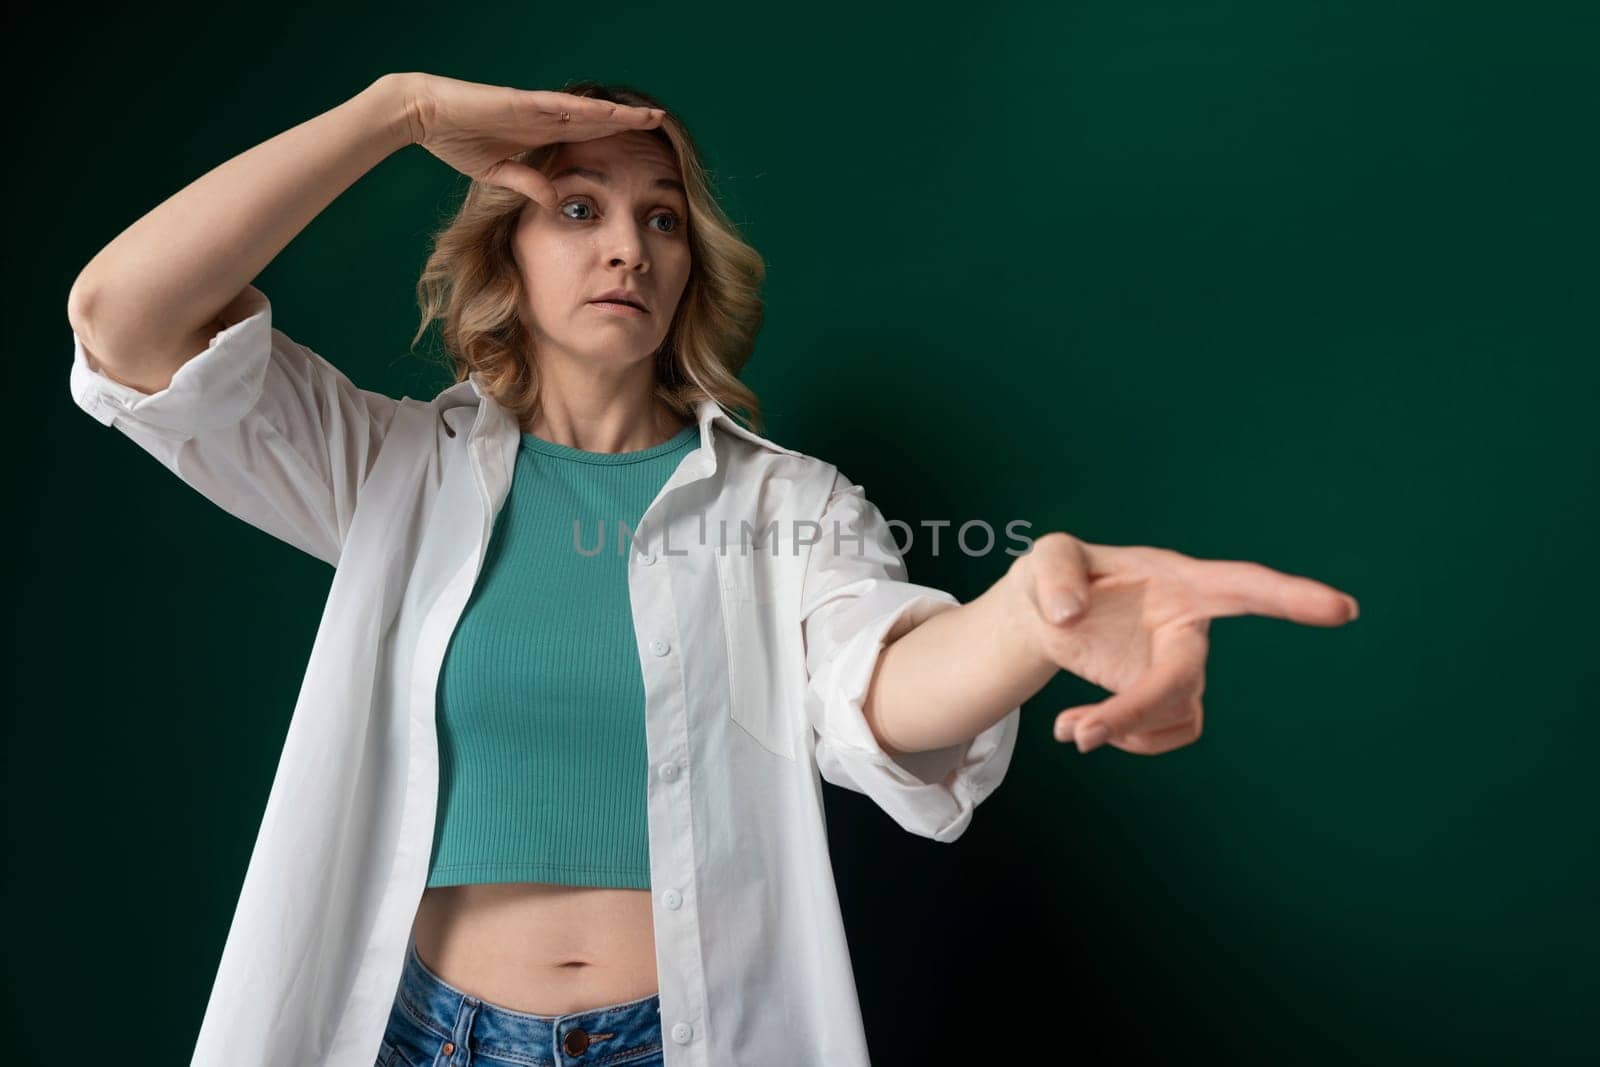 A woman wearing a green shirt is pointing at an unidentified object or subject. Her arm is extended, indicating a specific direction or target. The gesture suggests she is drawing attention to something noteworthy.